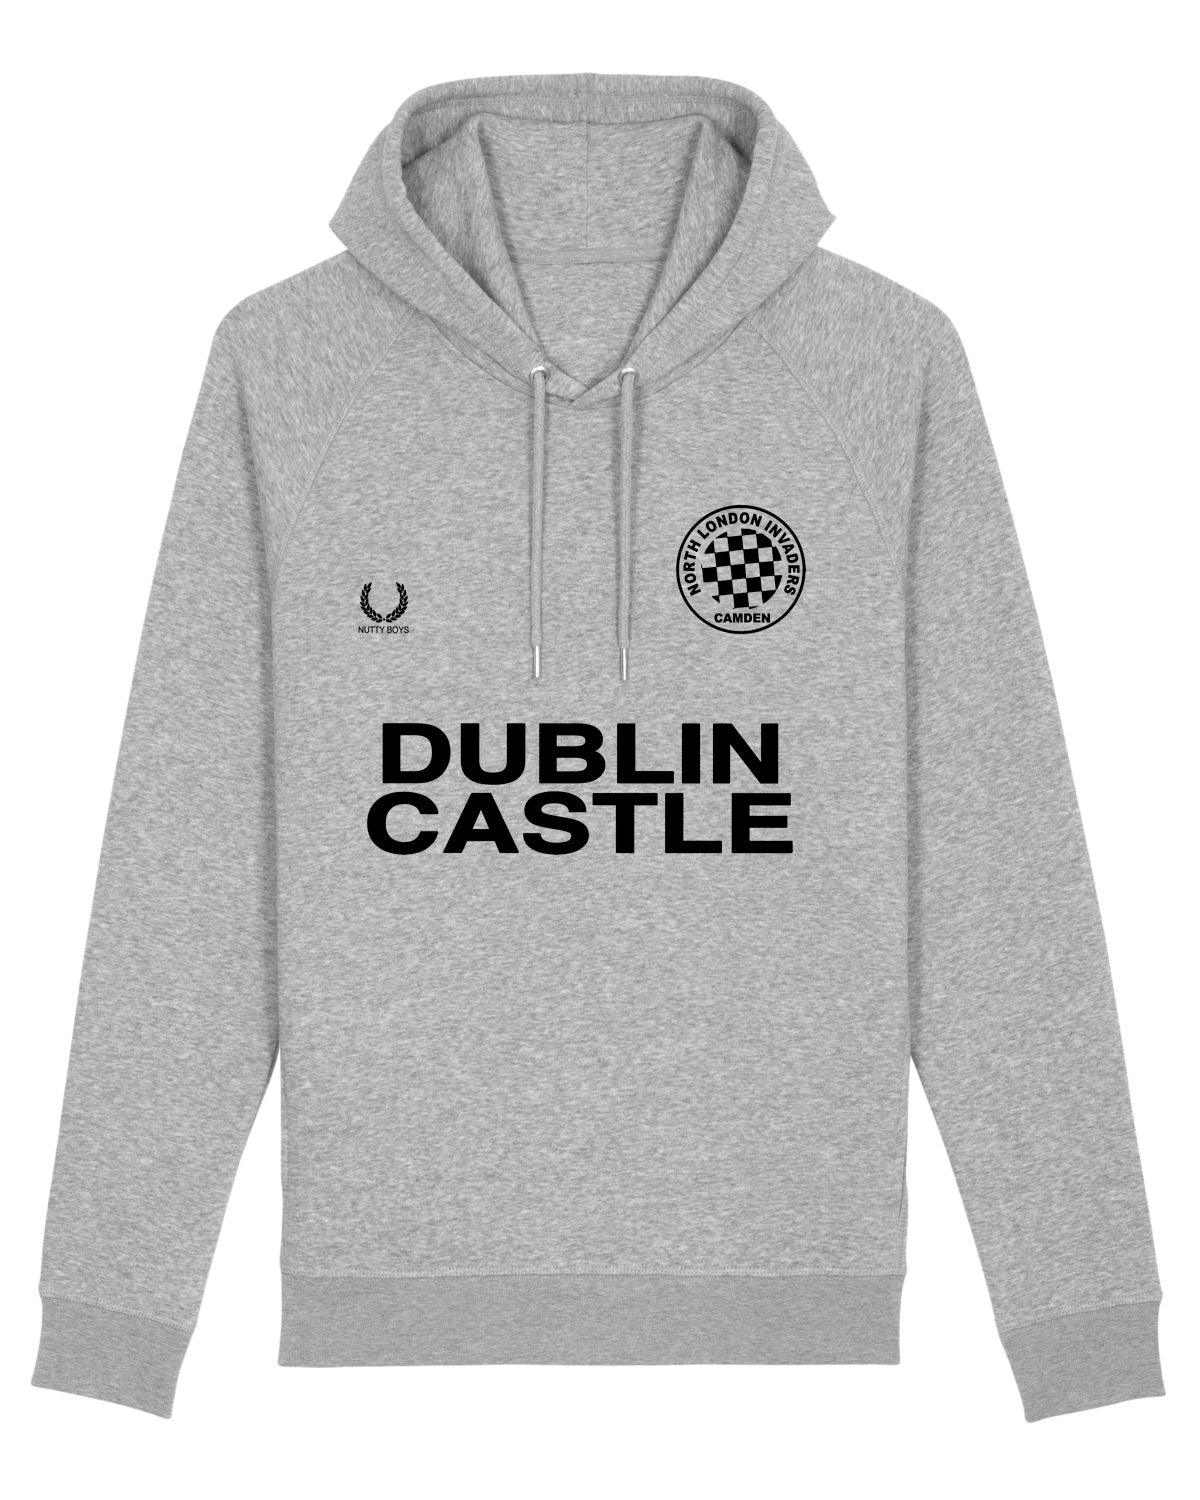 NORTH LONDON INVADERS : Premium Quality Hoodie Inspired by Madness & Football Shirts. Small to 3XL - SOUND IS COLOUR